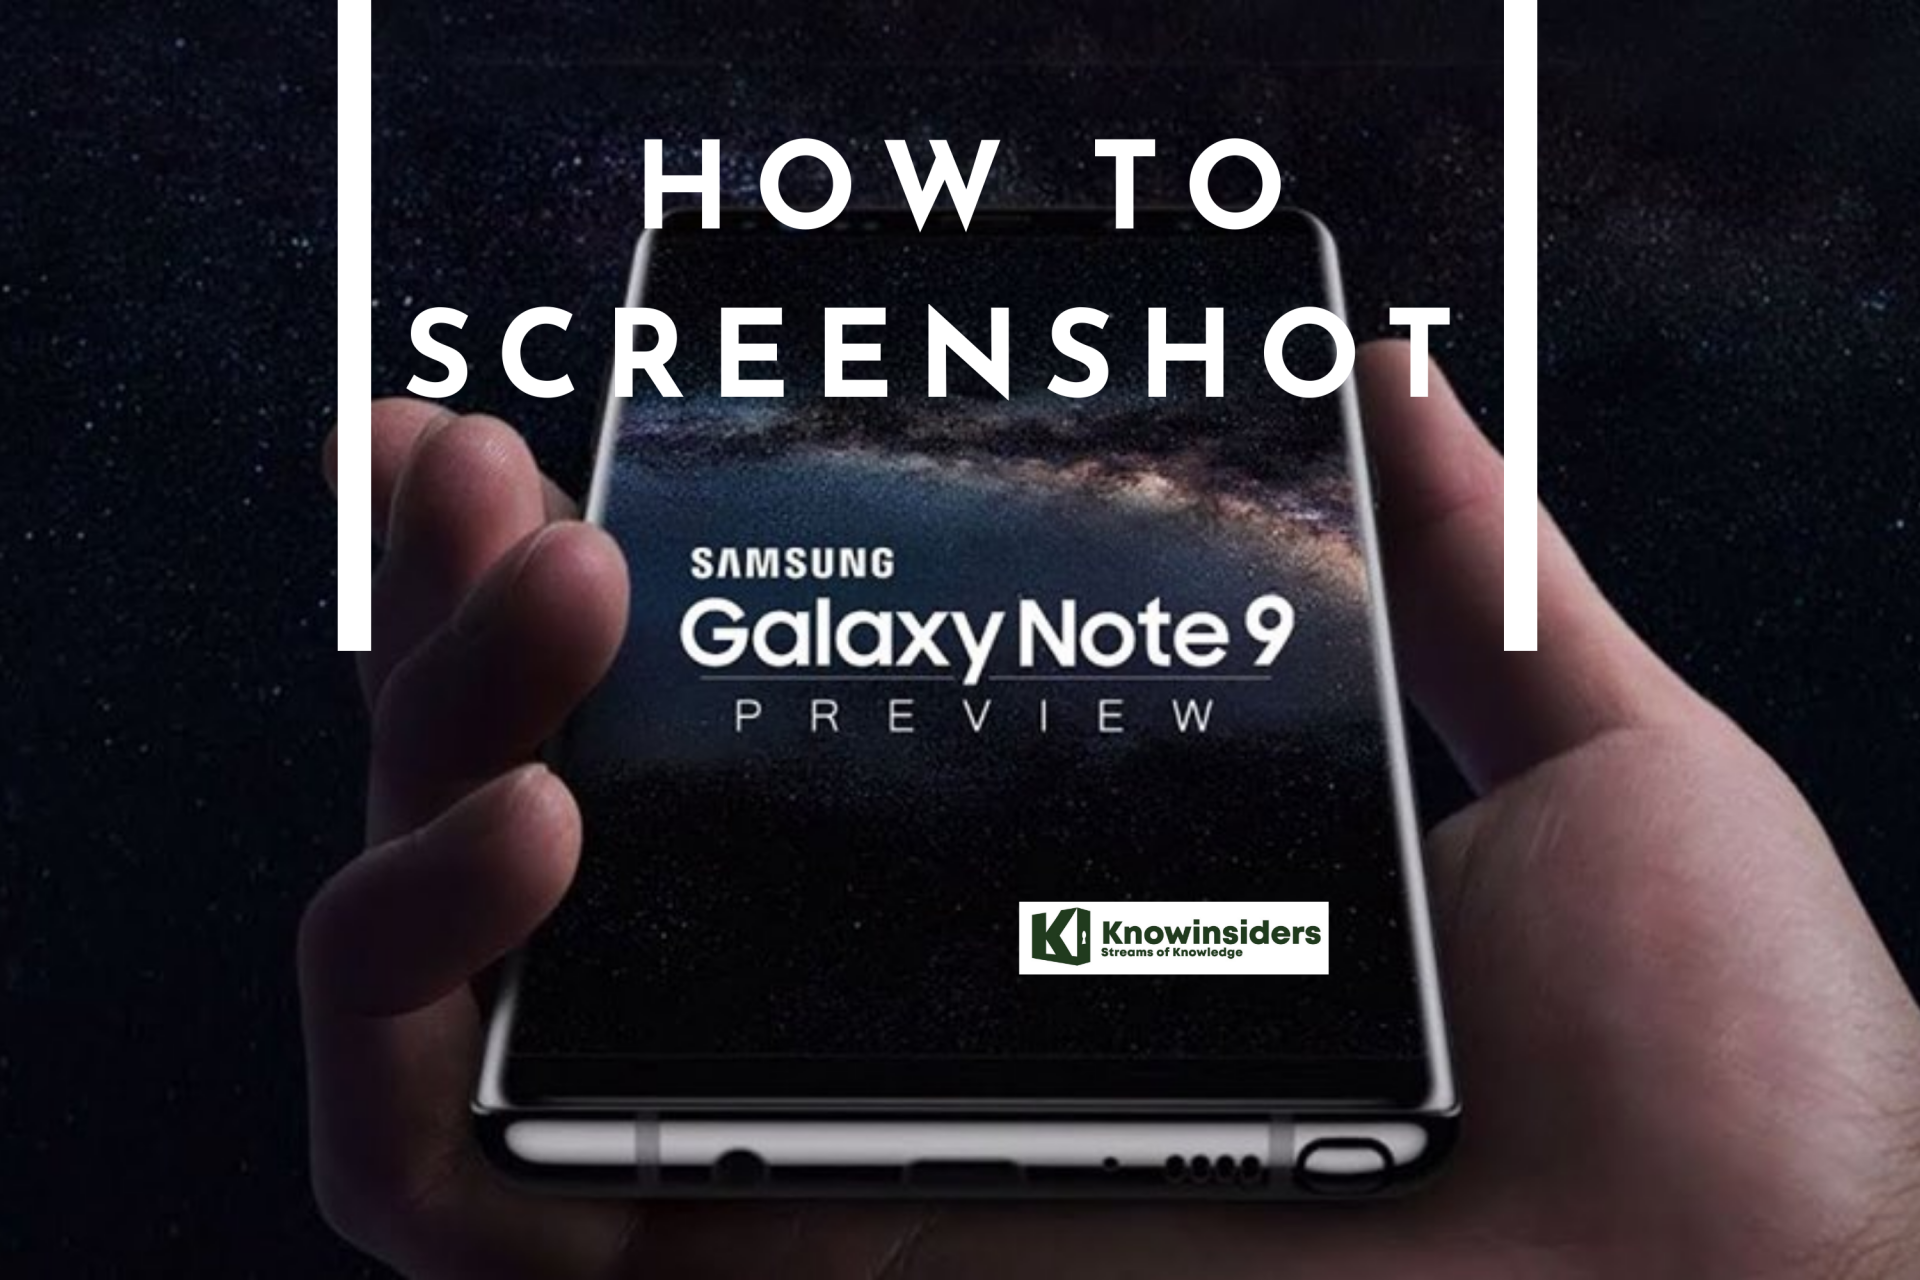 how to screenshot on samsung galaxy note 9 a piece of cake